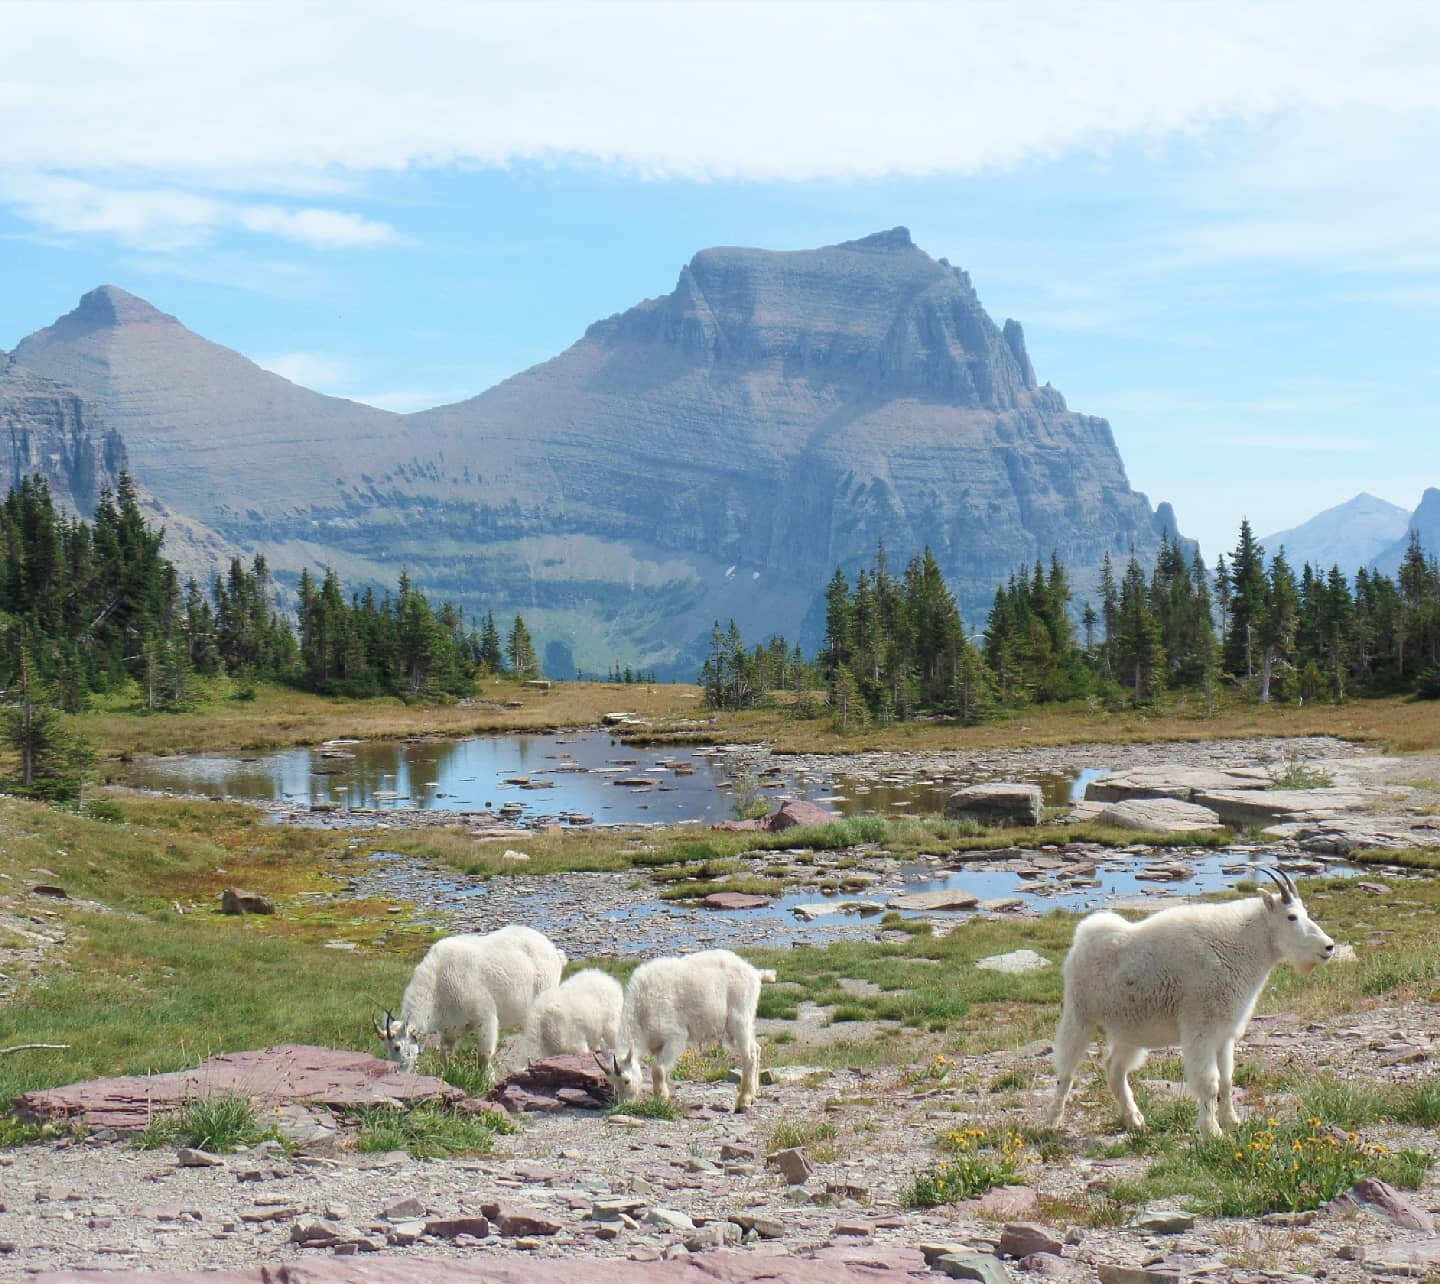 What's your favorite wildlife you've ever seen out on the trails?

Ours for sure were the mountain goats in Glacier National Park!&nbsp; Check out the blog linked in our bio to see where we were able to find them if you're planning a trip here!

We'v